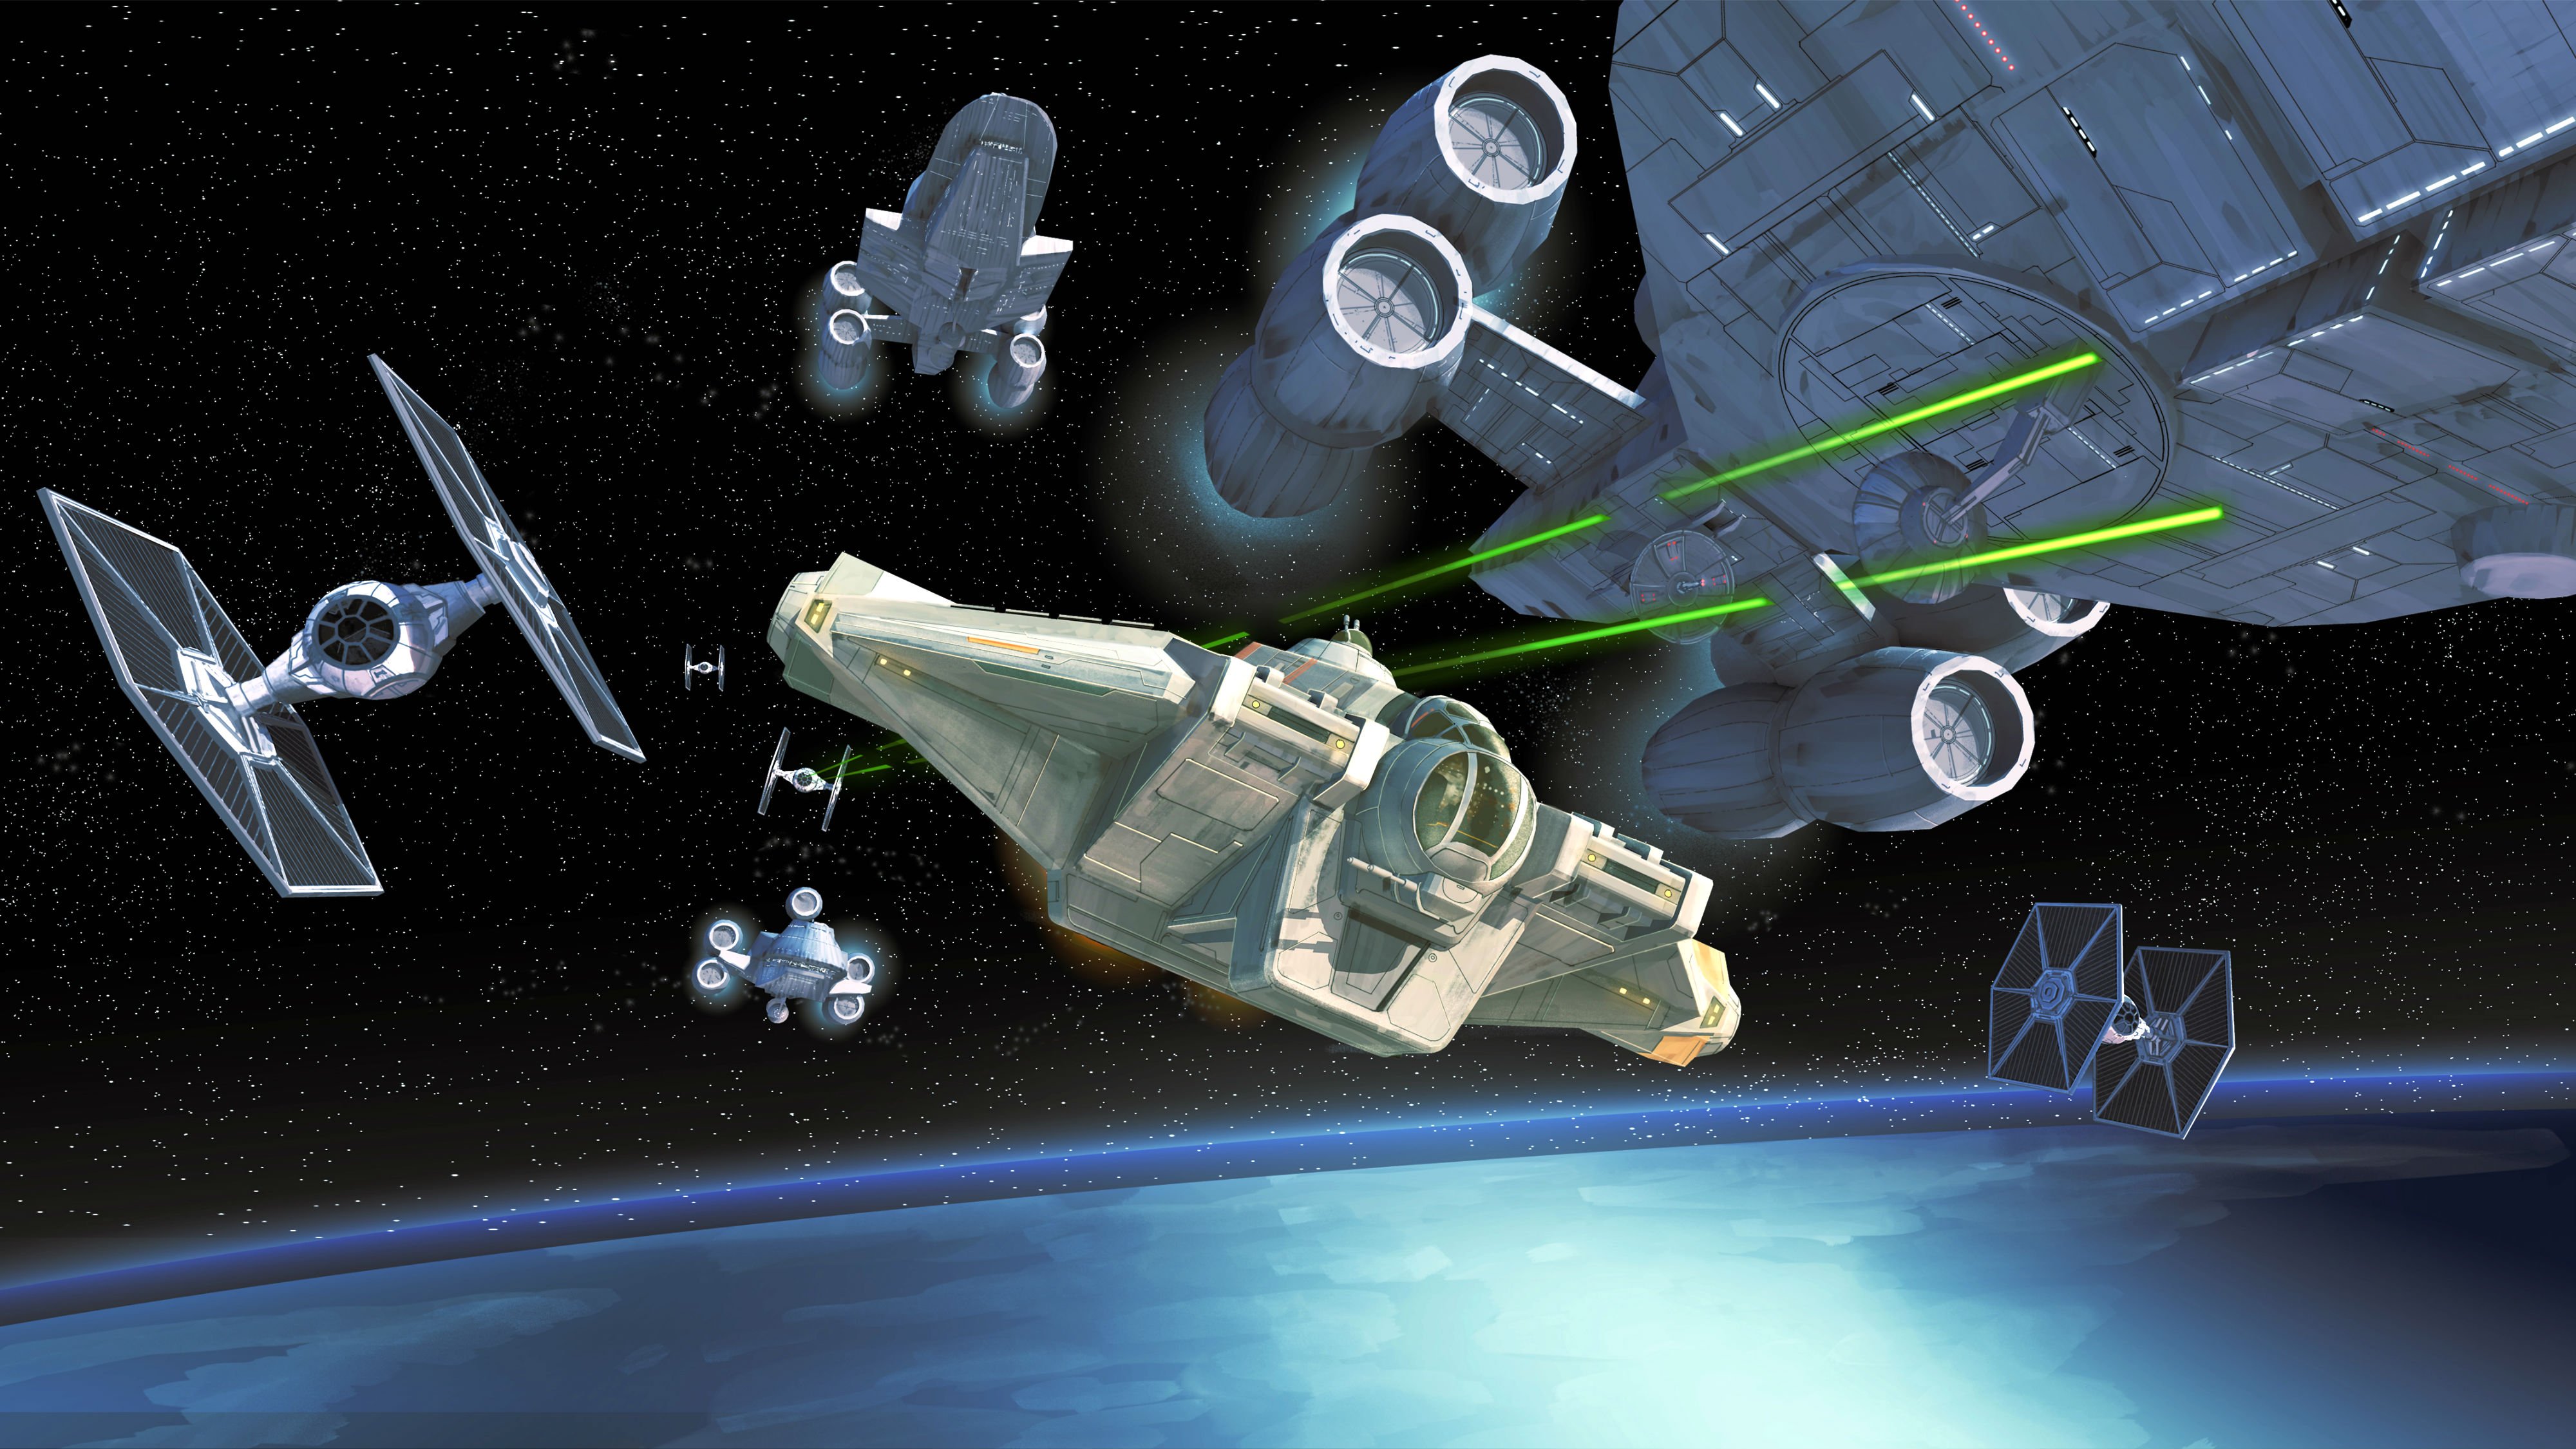 star wars animated wallpaper,spacecraft,space,vehicle,fictional character,outer space